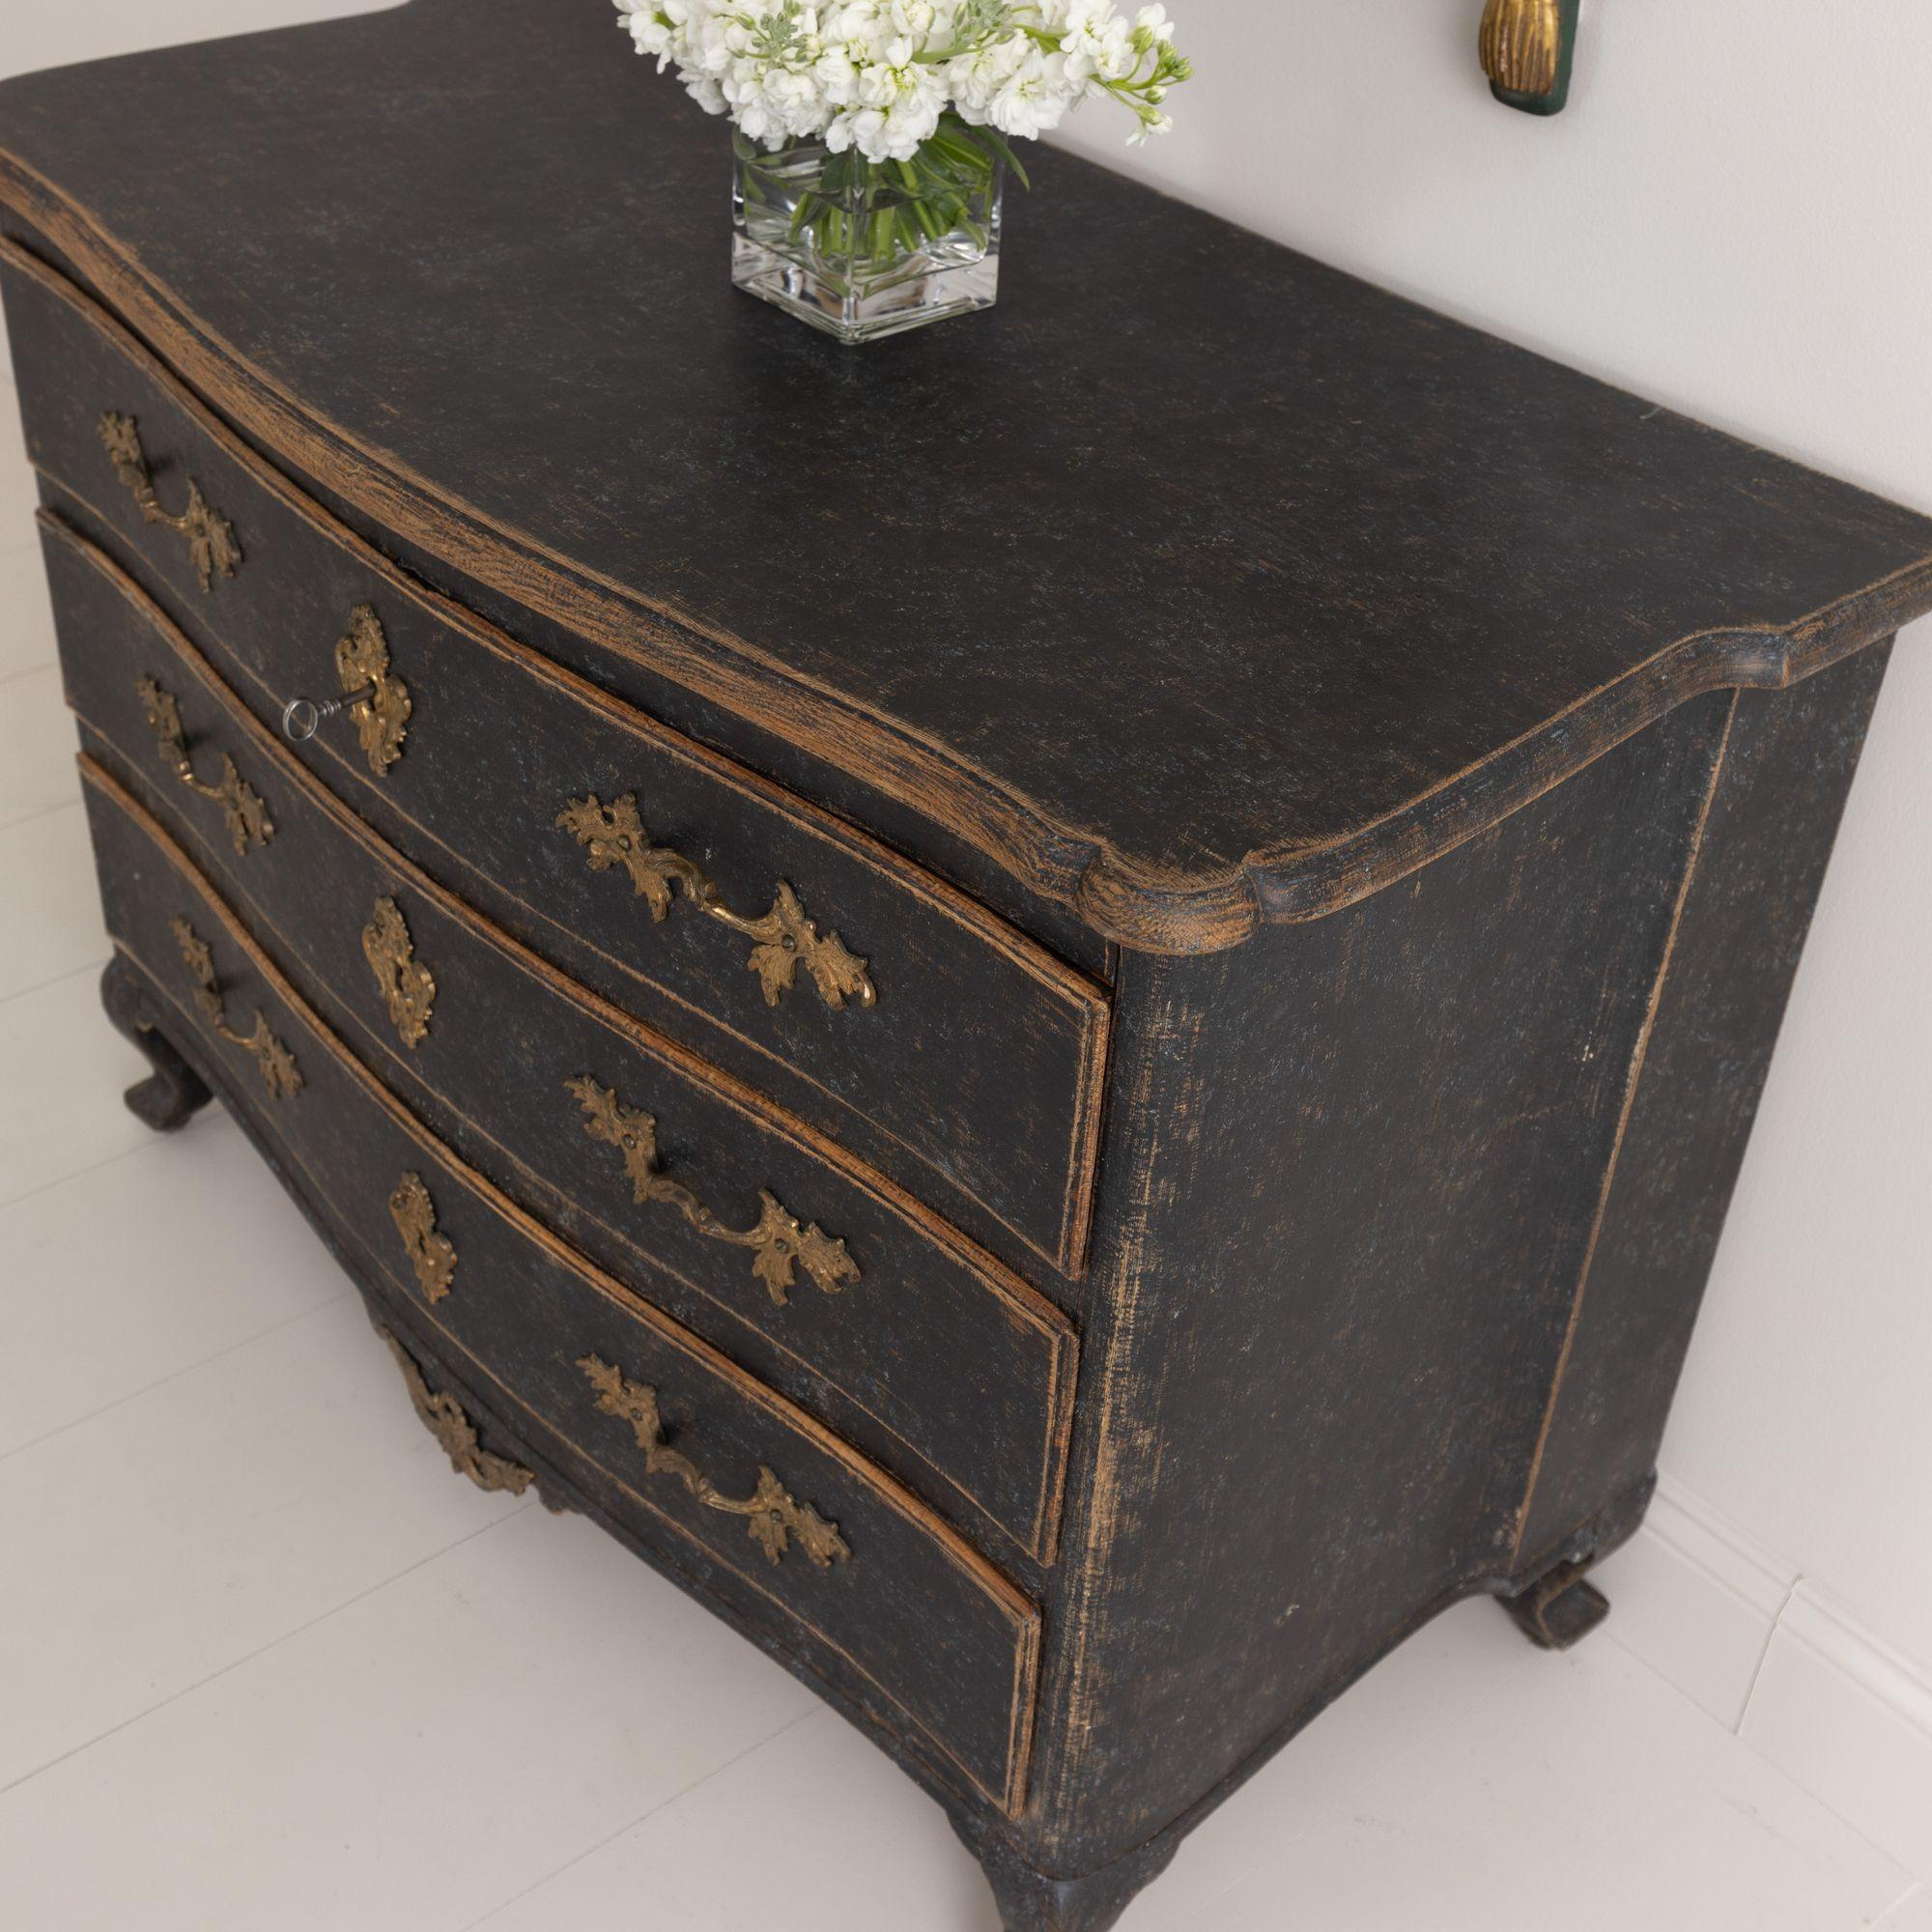 18th C. Swedish Rococo Period Black Painted Commode with Original Brass Hardware For Sale 11